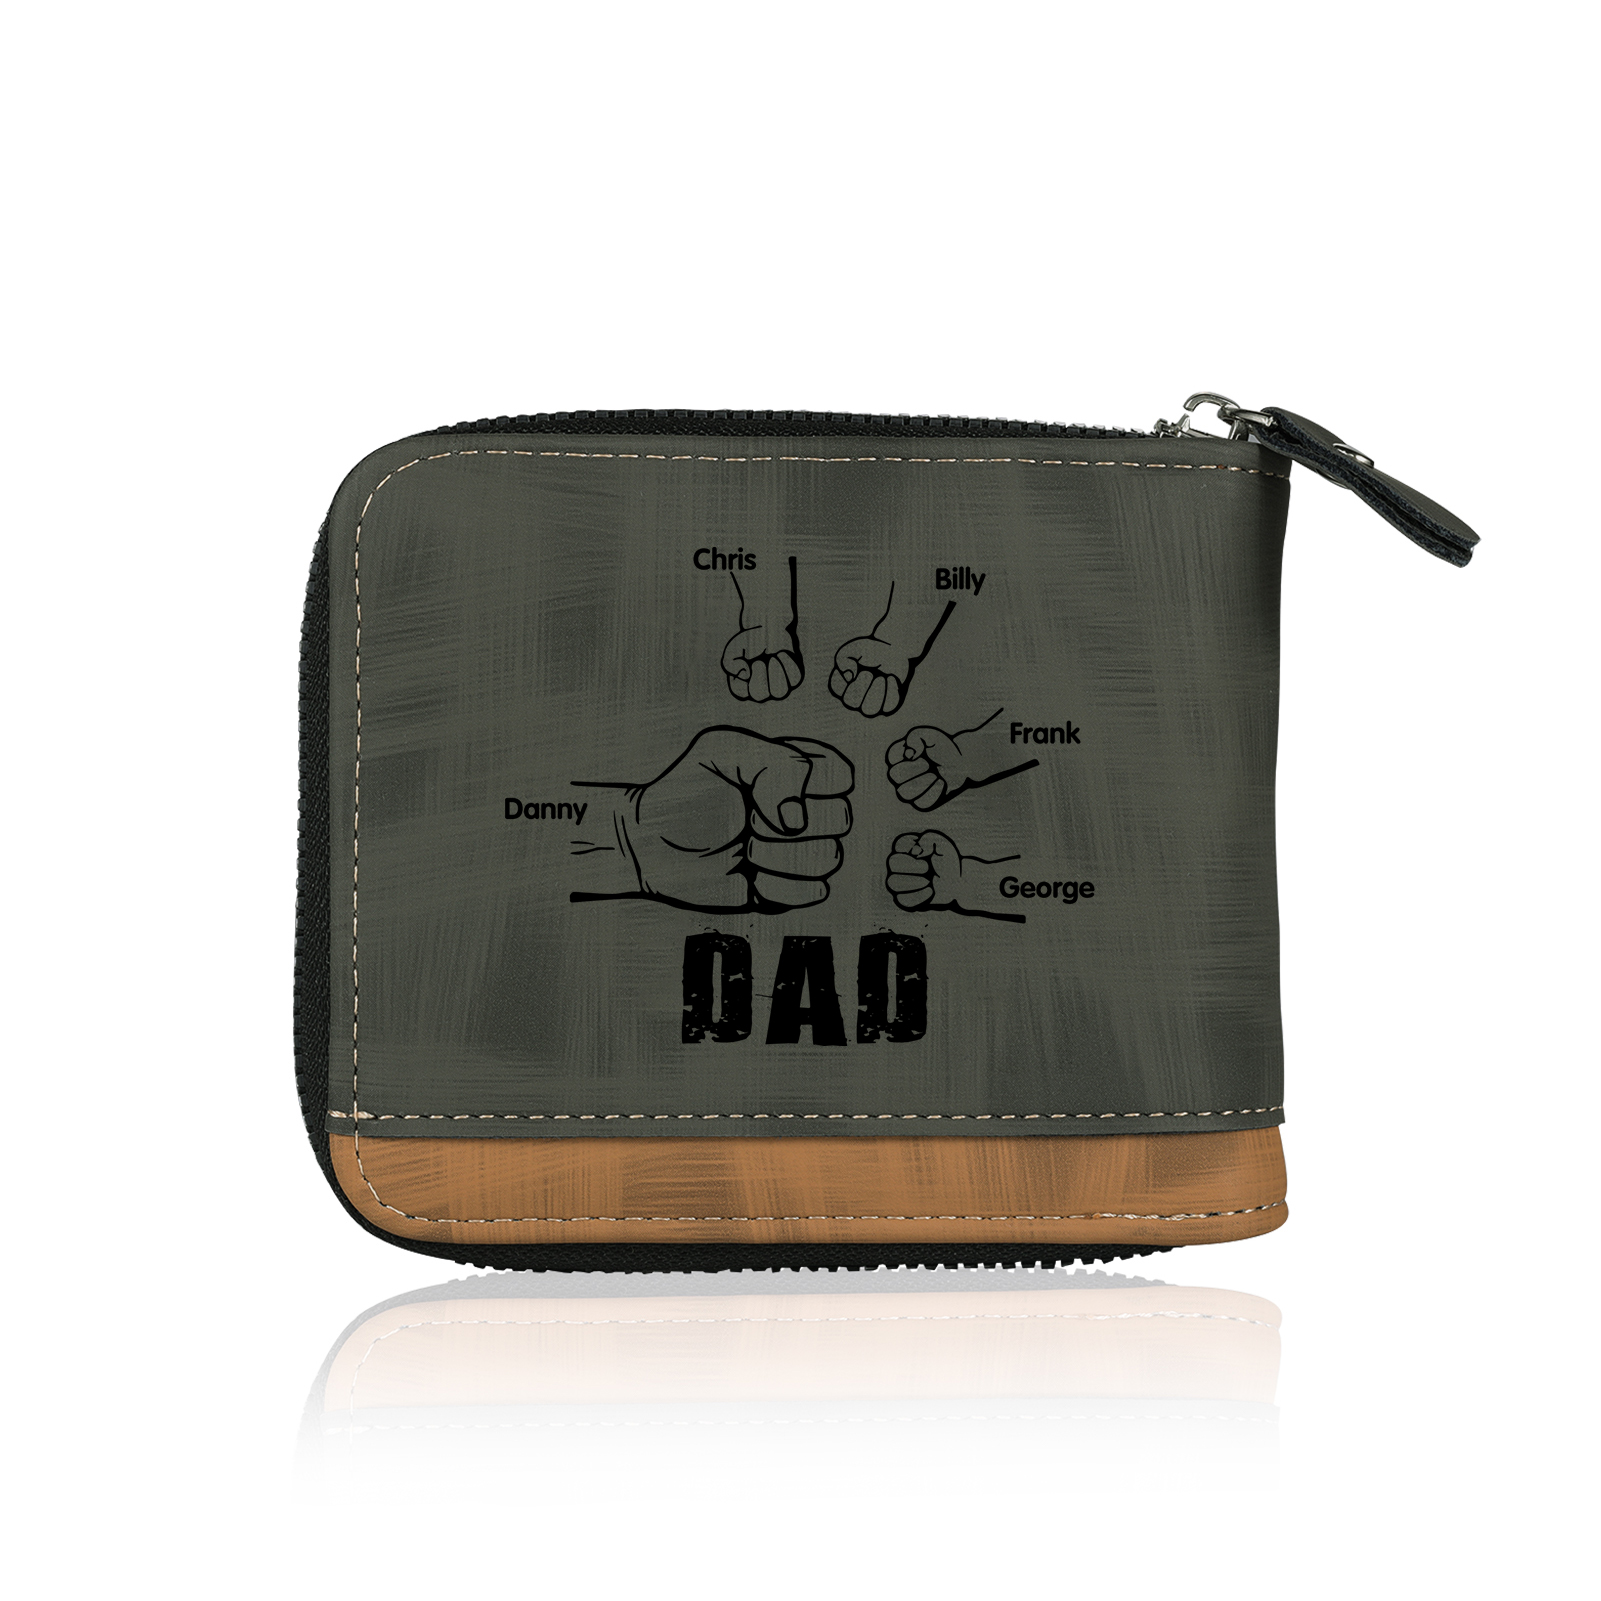 5 Names - Personalized Photo Custom Leather Men's Zipper Wallet as a Father's Day Gift for Dad